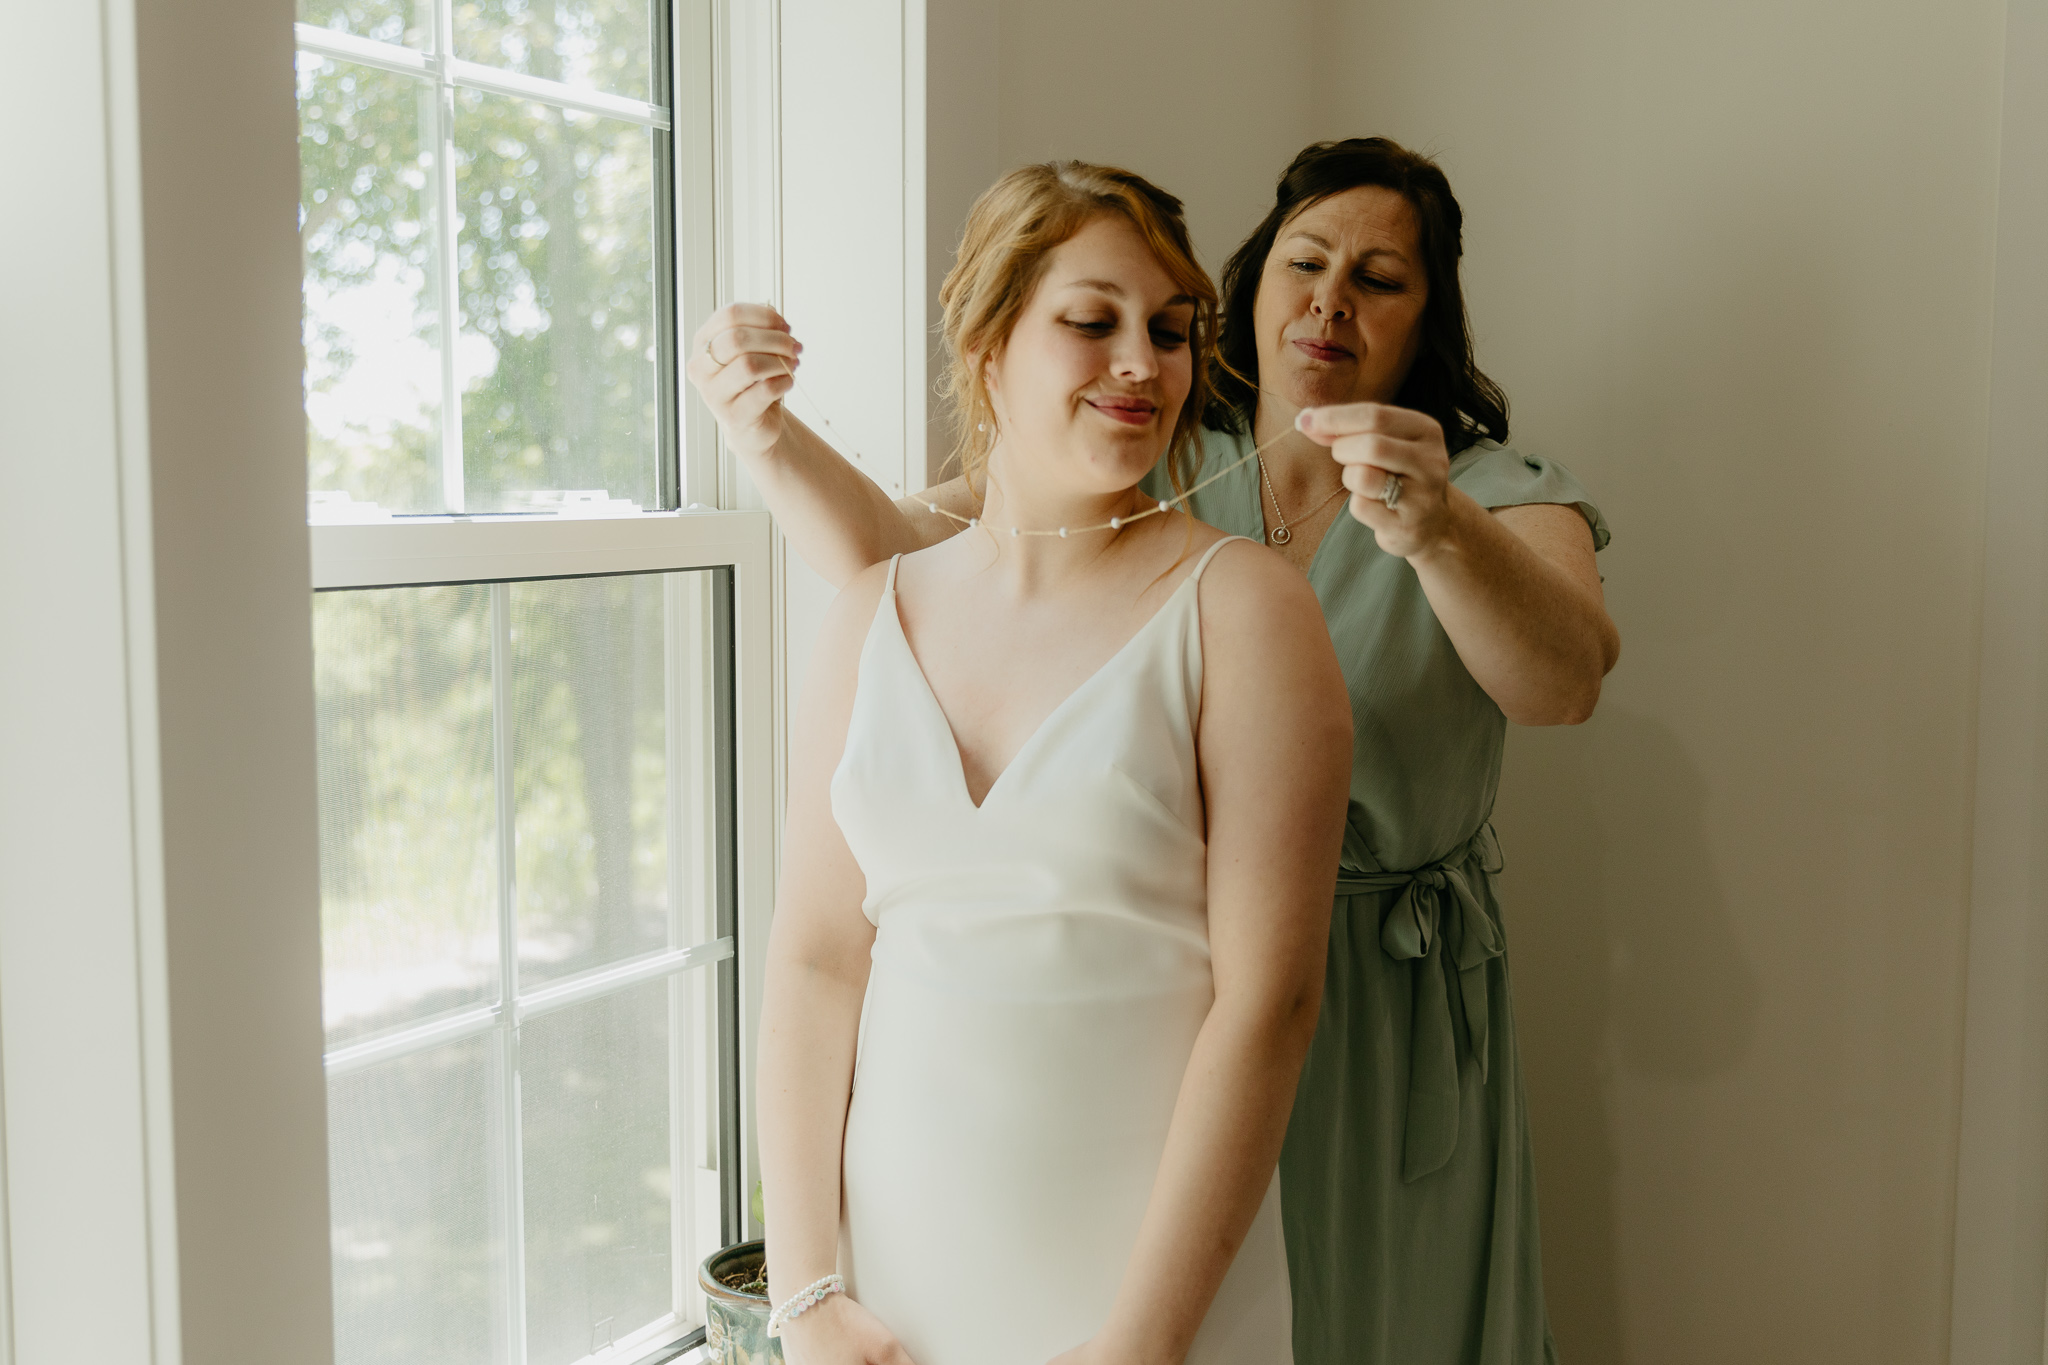 Intimate Indiana Outdoor Wedding // Getting Ready with the Girls